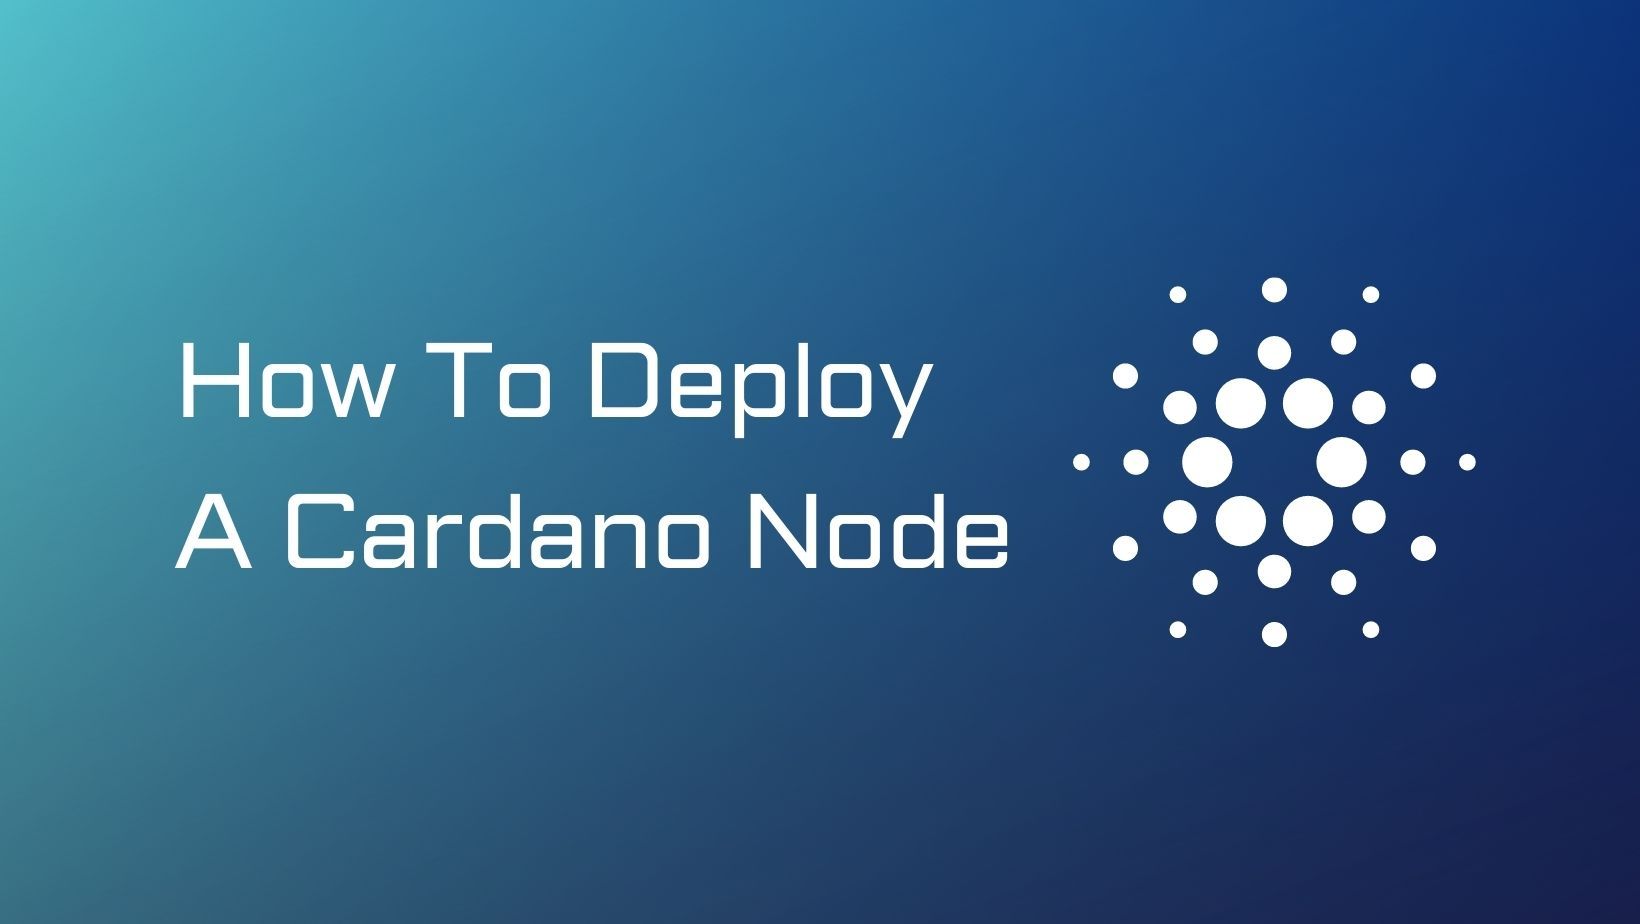 How to Deploy a Cardano (ADA) Node on Linux